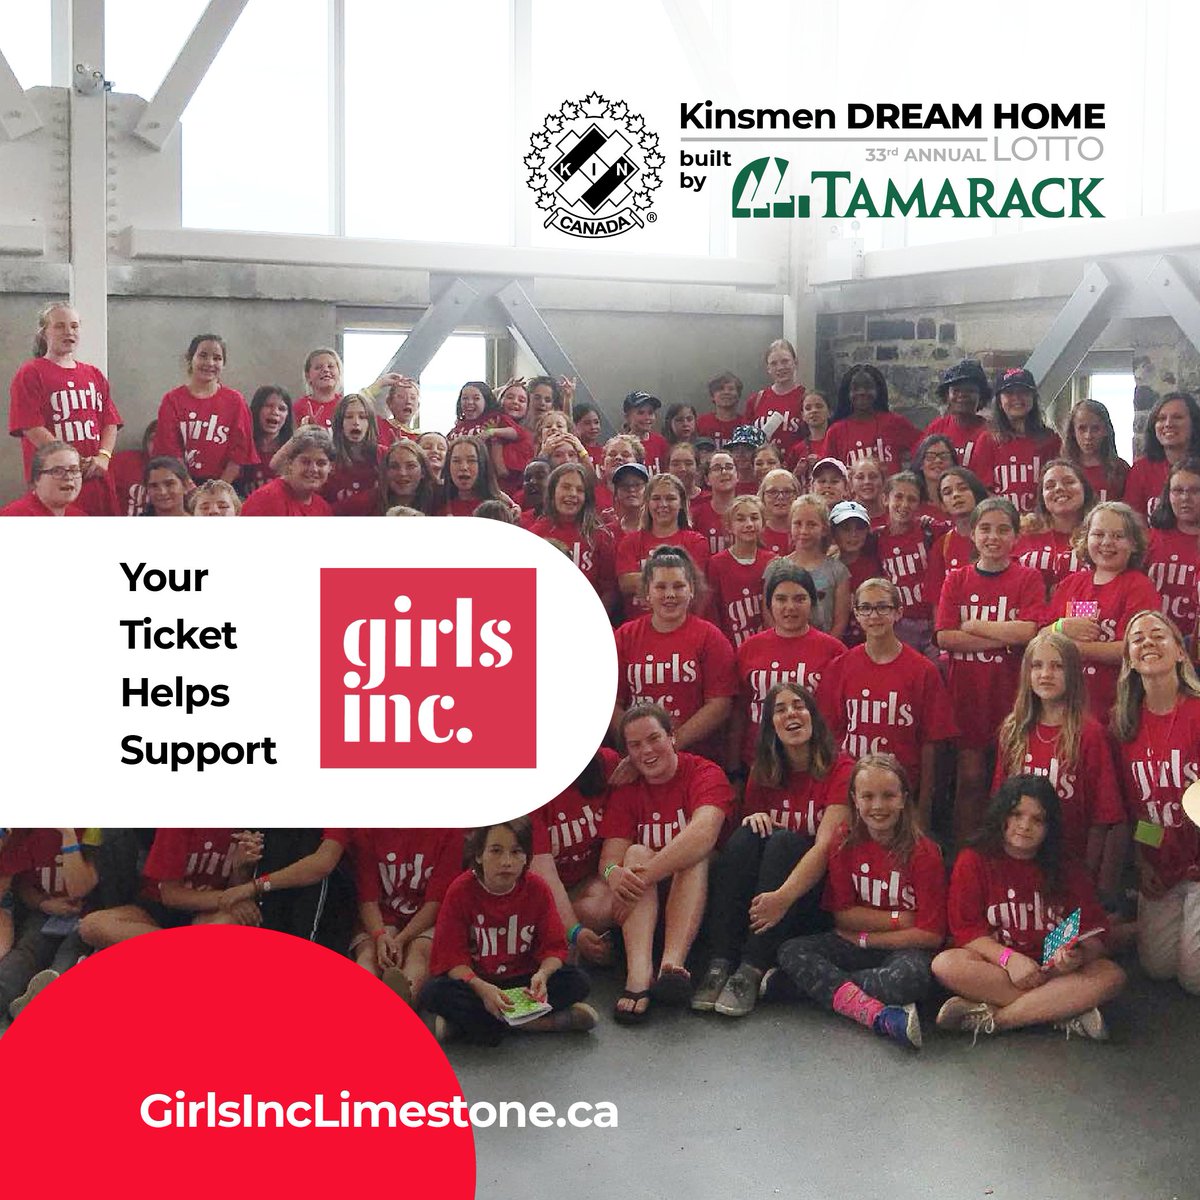 Your ticket helps young women in our community, too! 👩

Proceeds support @girlsinclimesto

'Girls Inc. Limestone provides life-skills education and mentoring programs for girls'

Learn more at kinsmendreamhome.com/donations/girl… or by calling 1-888-588-6596